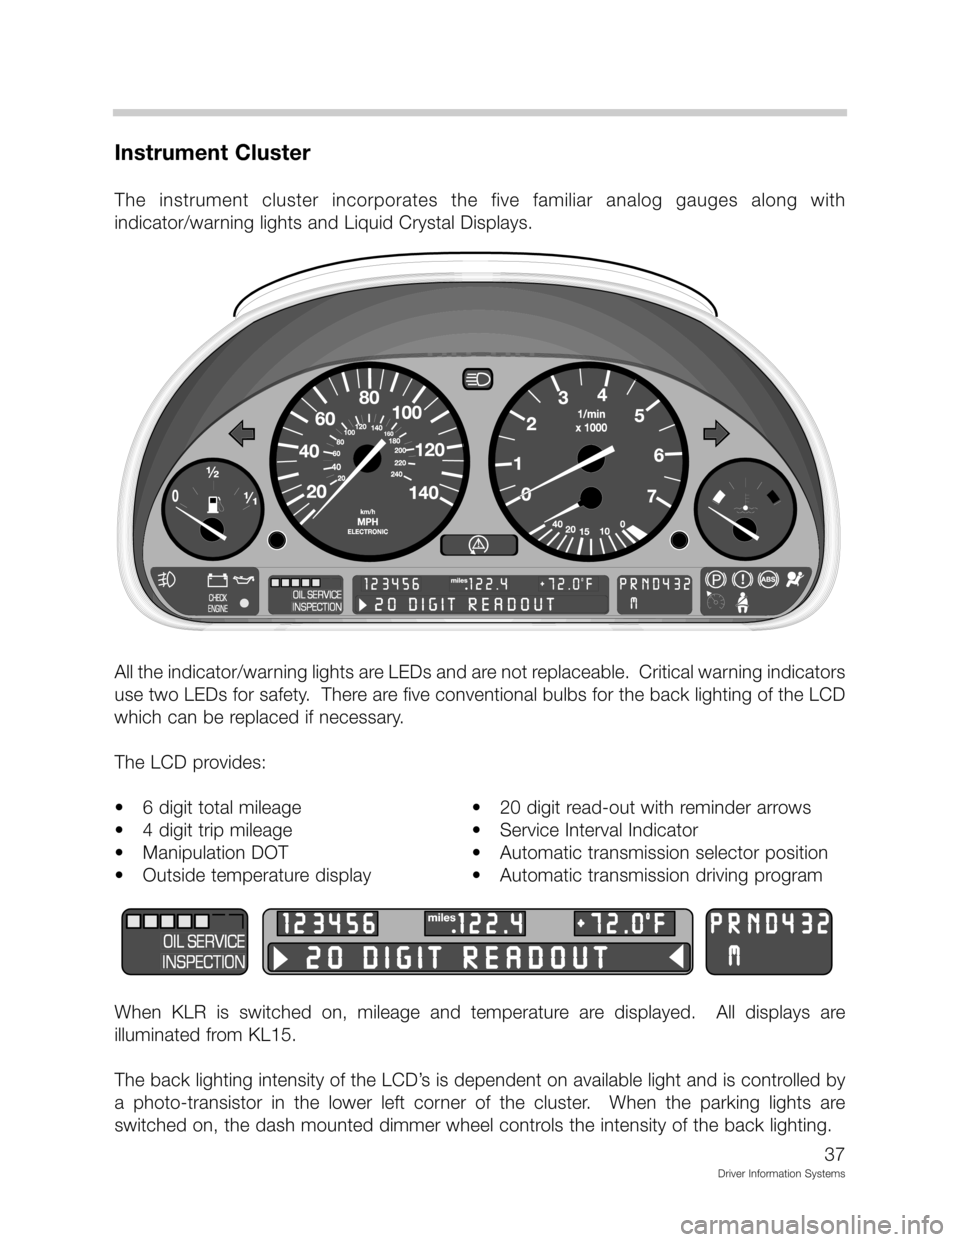 BMW Z3 ROADSTER 2002 E36 Driver Information Systems Manual 
		
 	
 
	   ;2 ;

 
 	 
 :
!":
!1D	!


-

!":
1